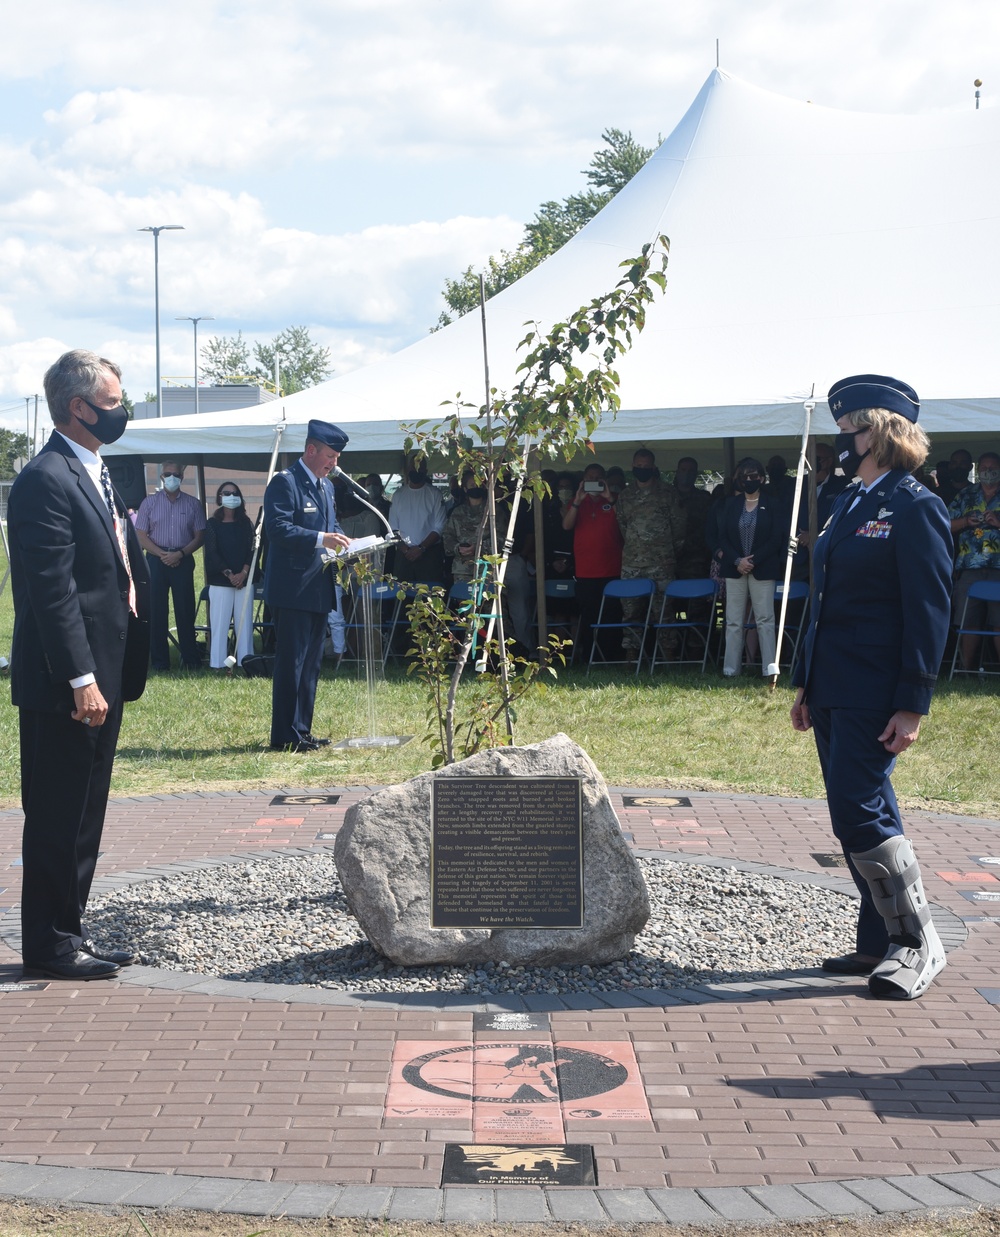 Air National Guard Deputy Director unveils 9/11 memorial at EADS